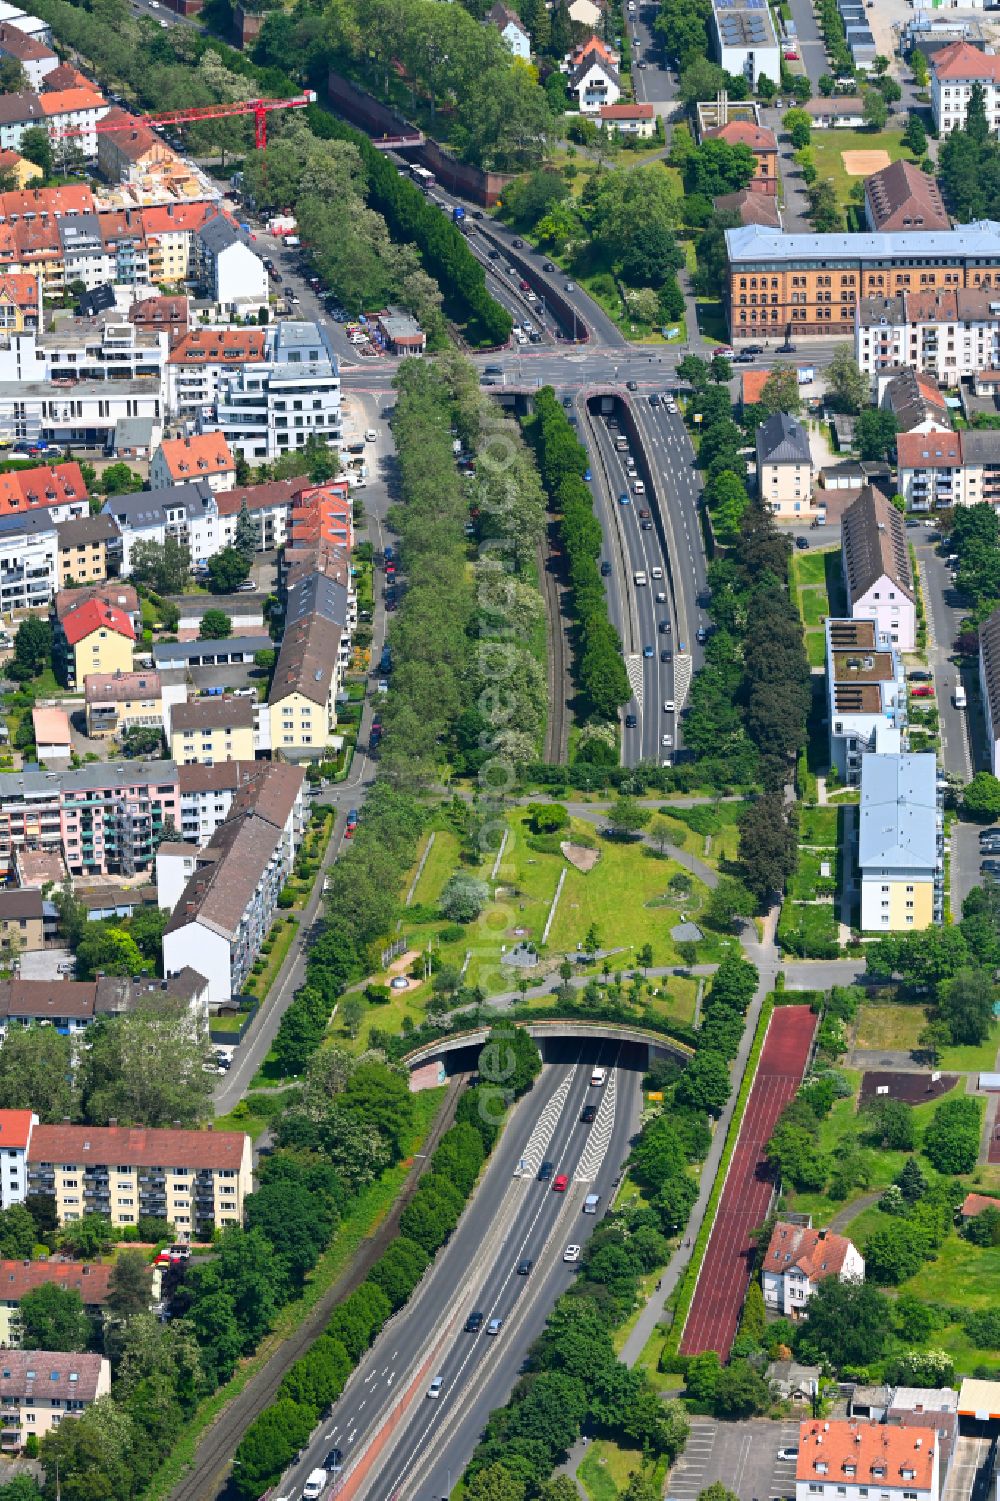 Aerial image Aschaffenburg - Bridge structure as a green bridge and park and tunneling over the road Suedring in the district Innenstadt in Aschaffenburg in the state Bavaria, Germany